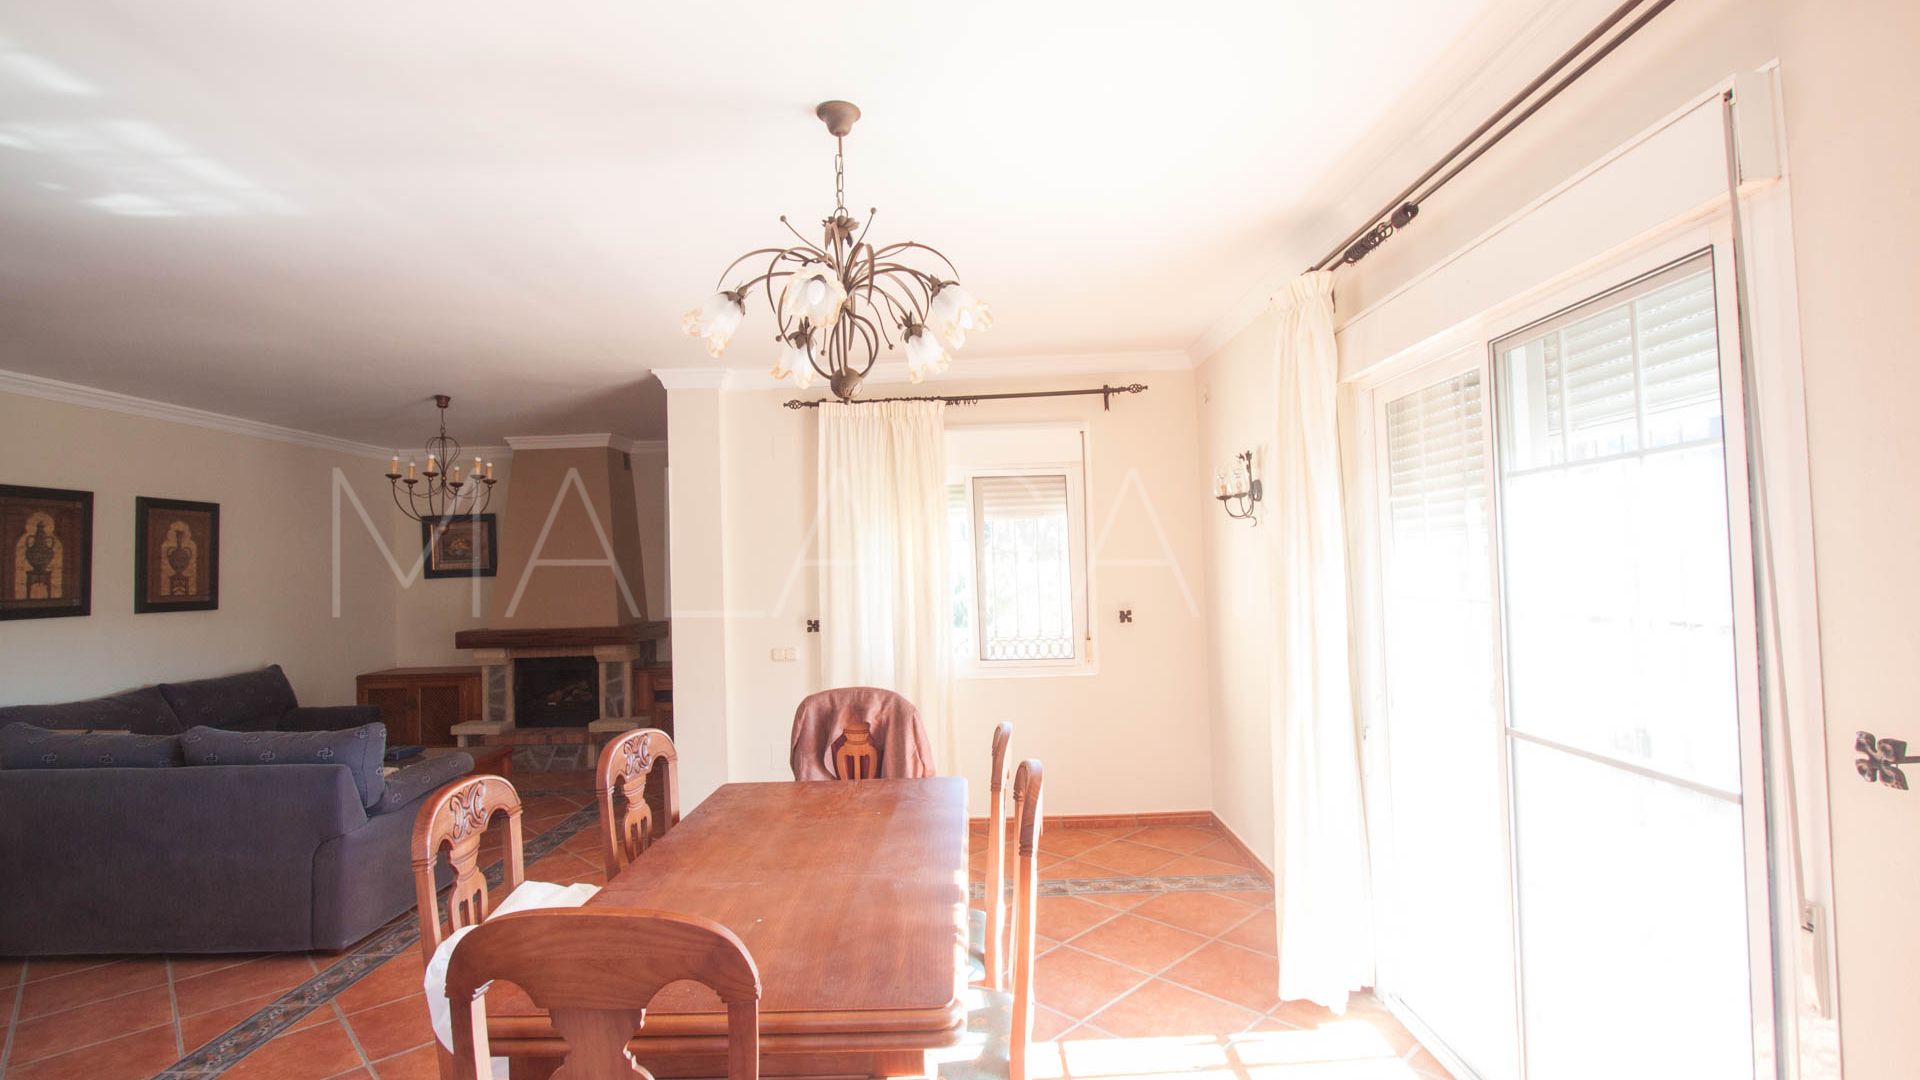 For sale finca in Estepona with 3 bedrooms